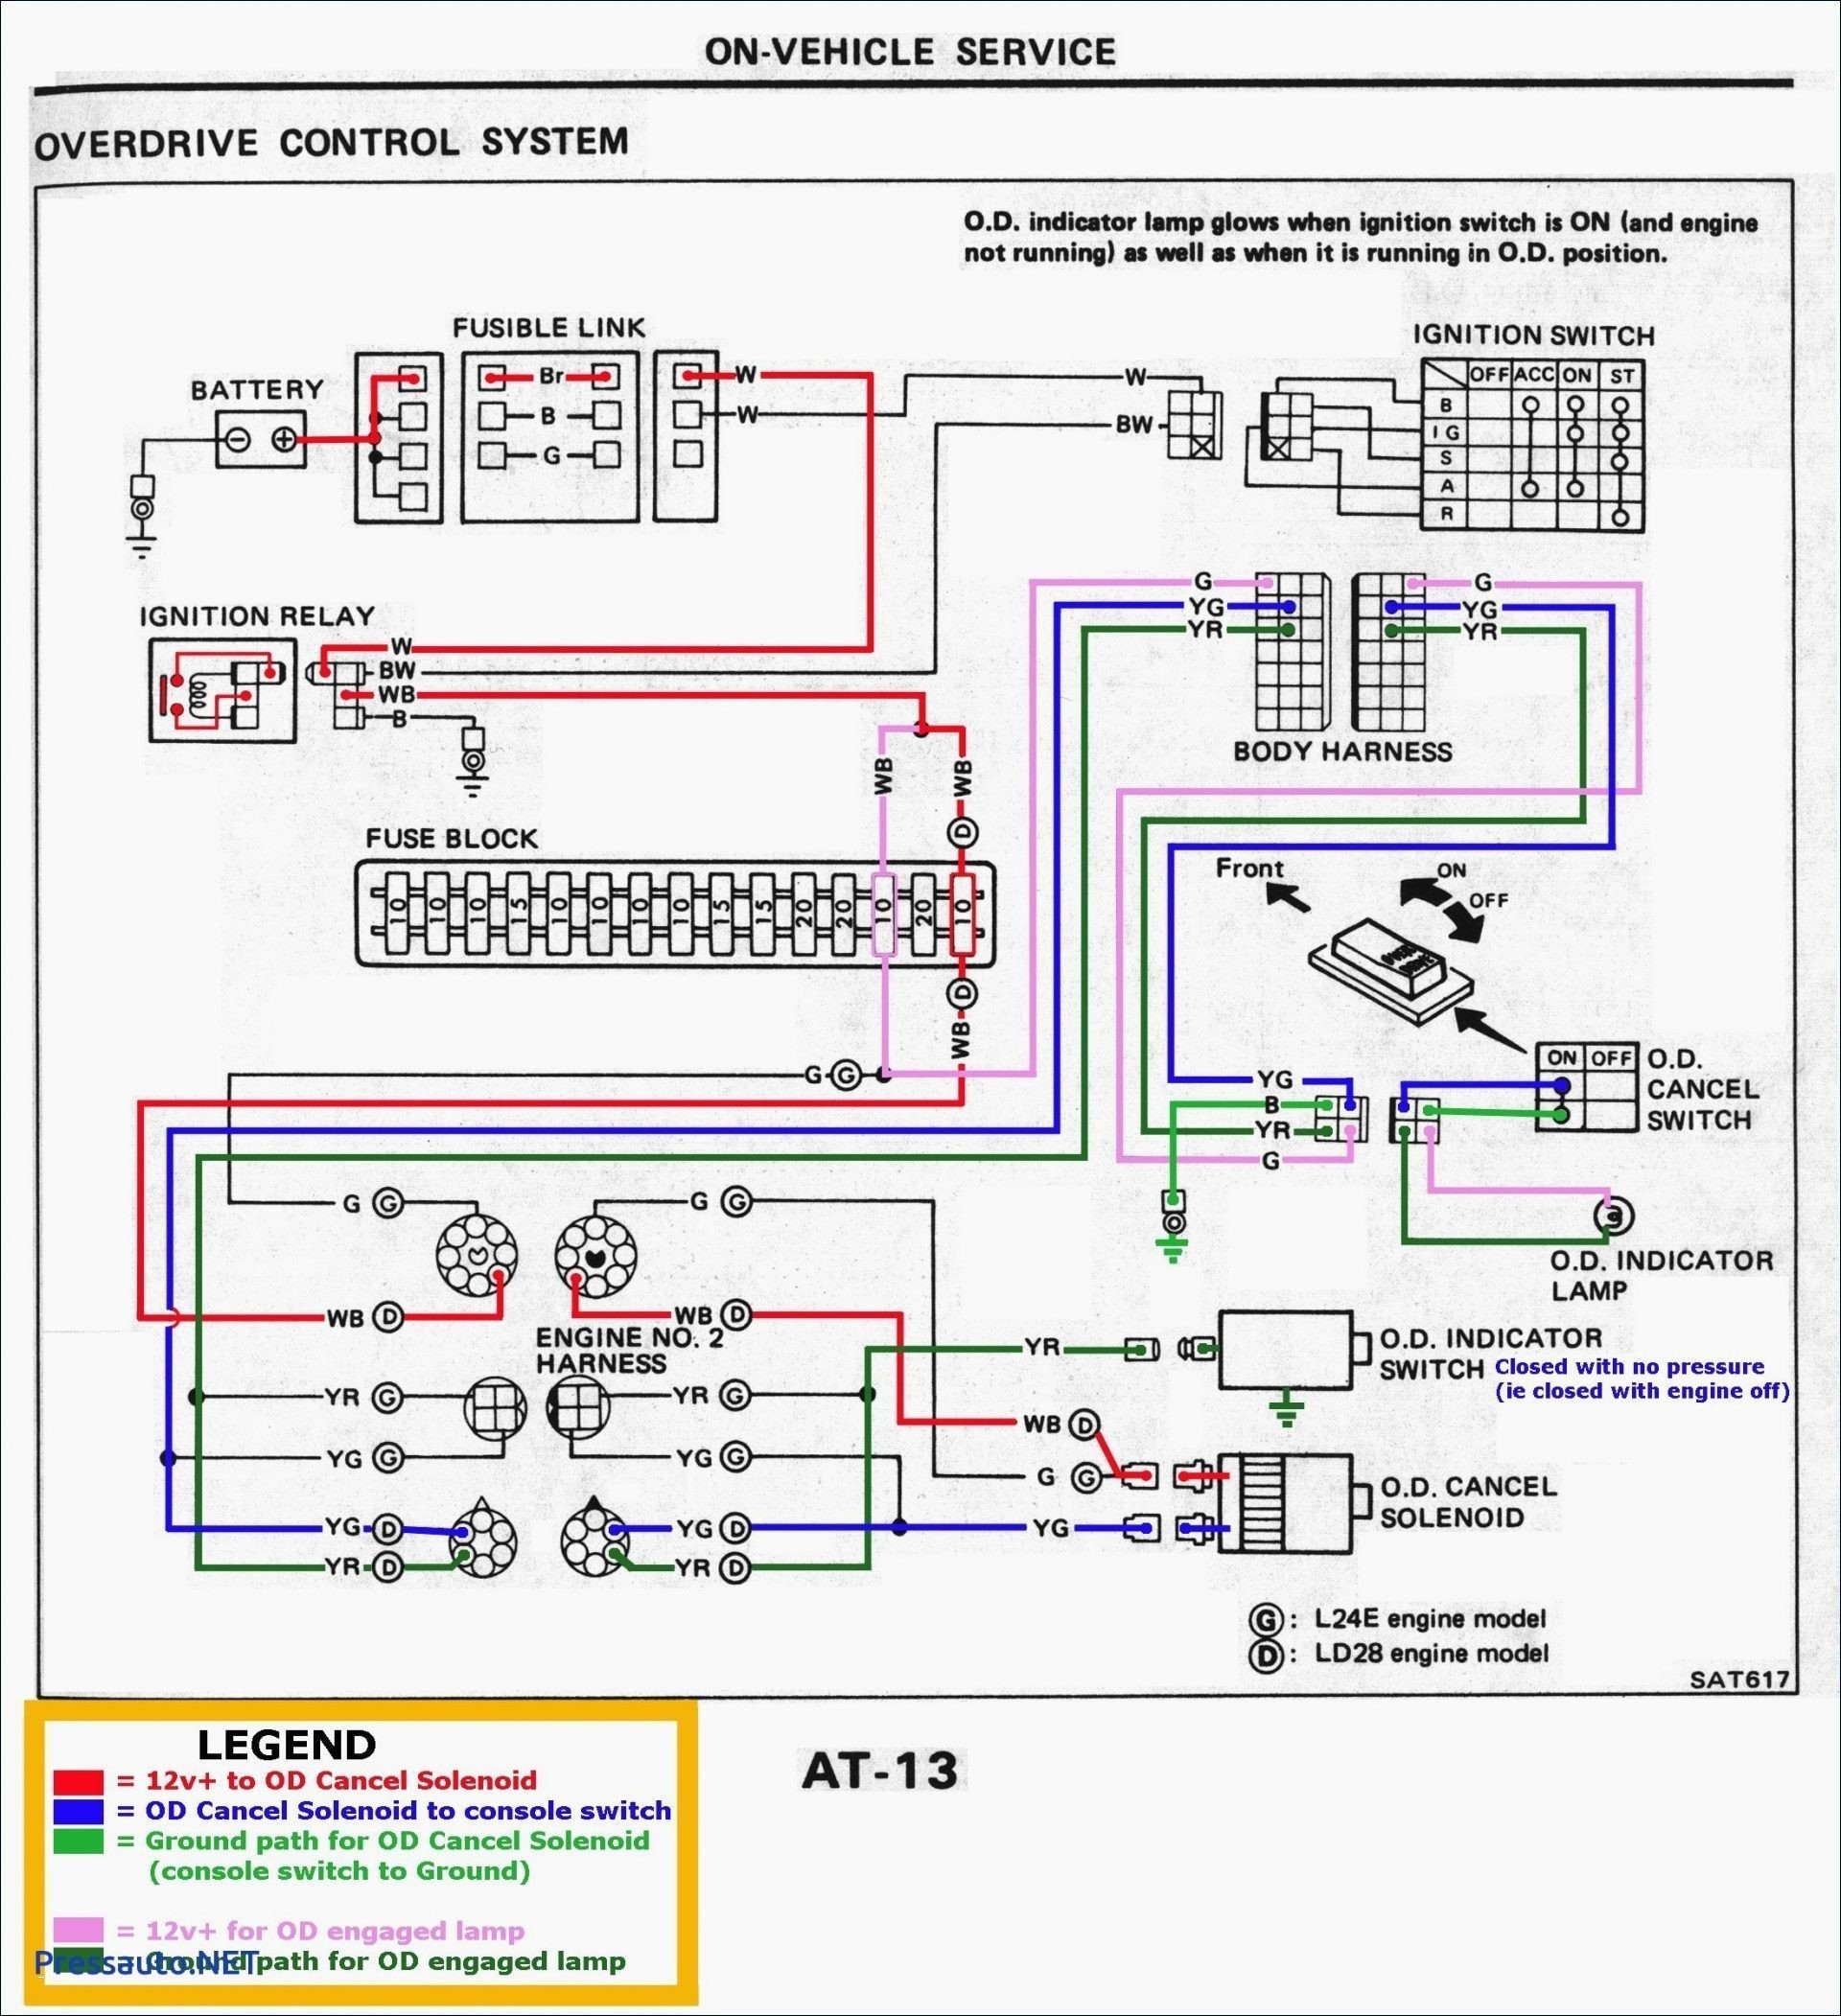 Circuit Diagram House Wiring Fresh Basic Electrical Wiring Lamp Beautiful About Electrical House Wiring